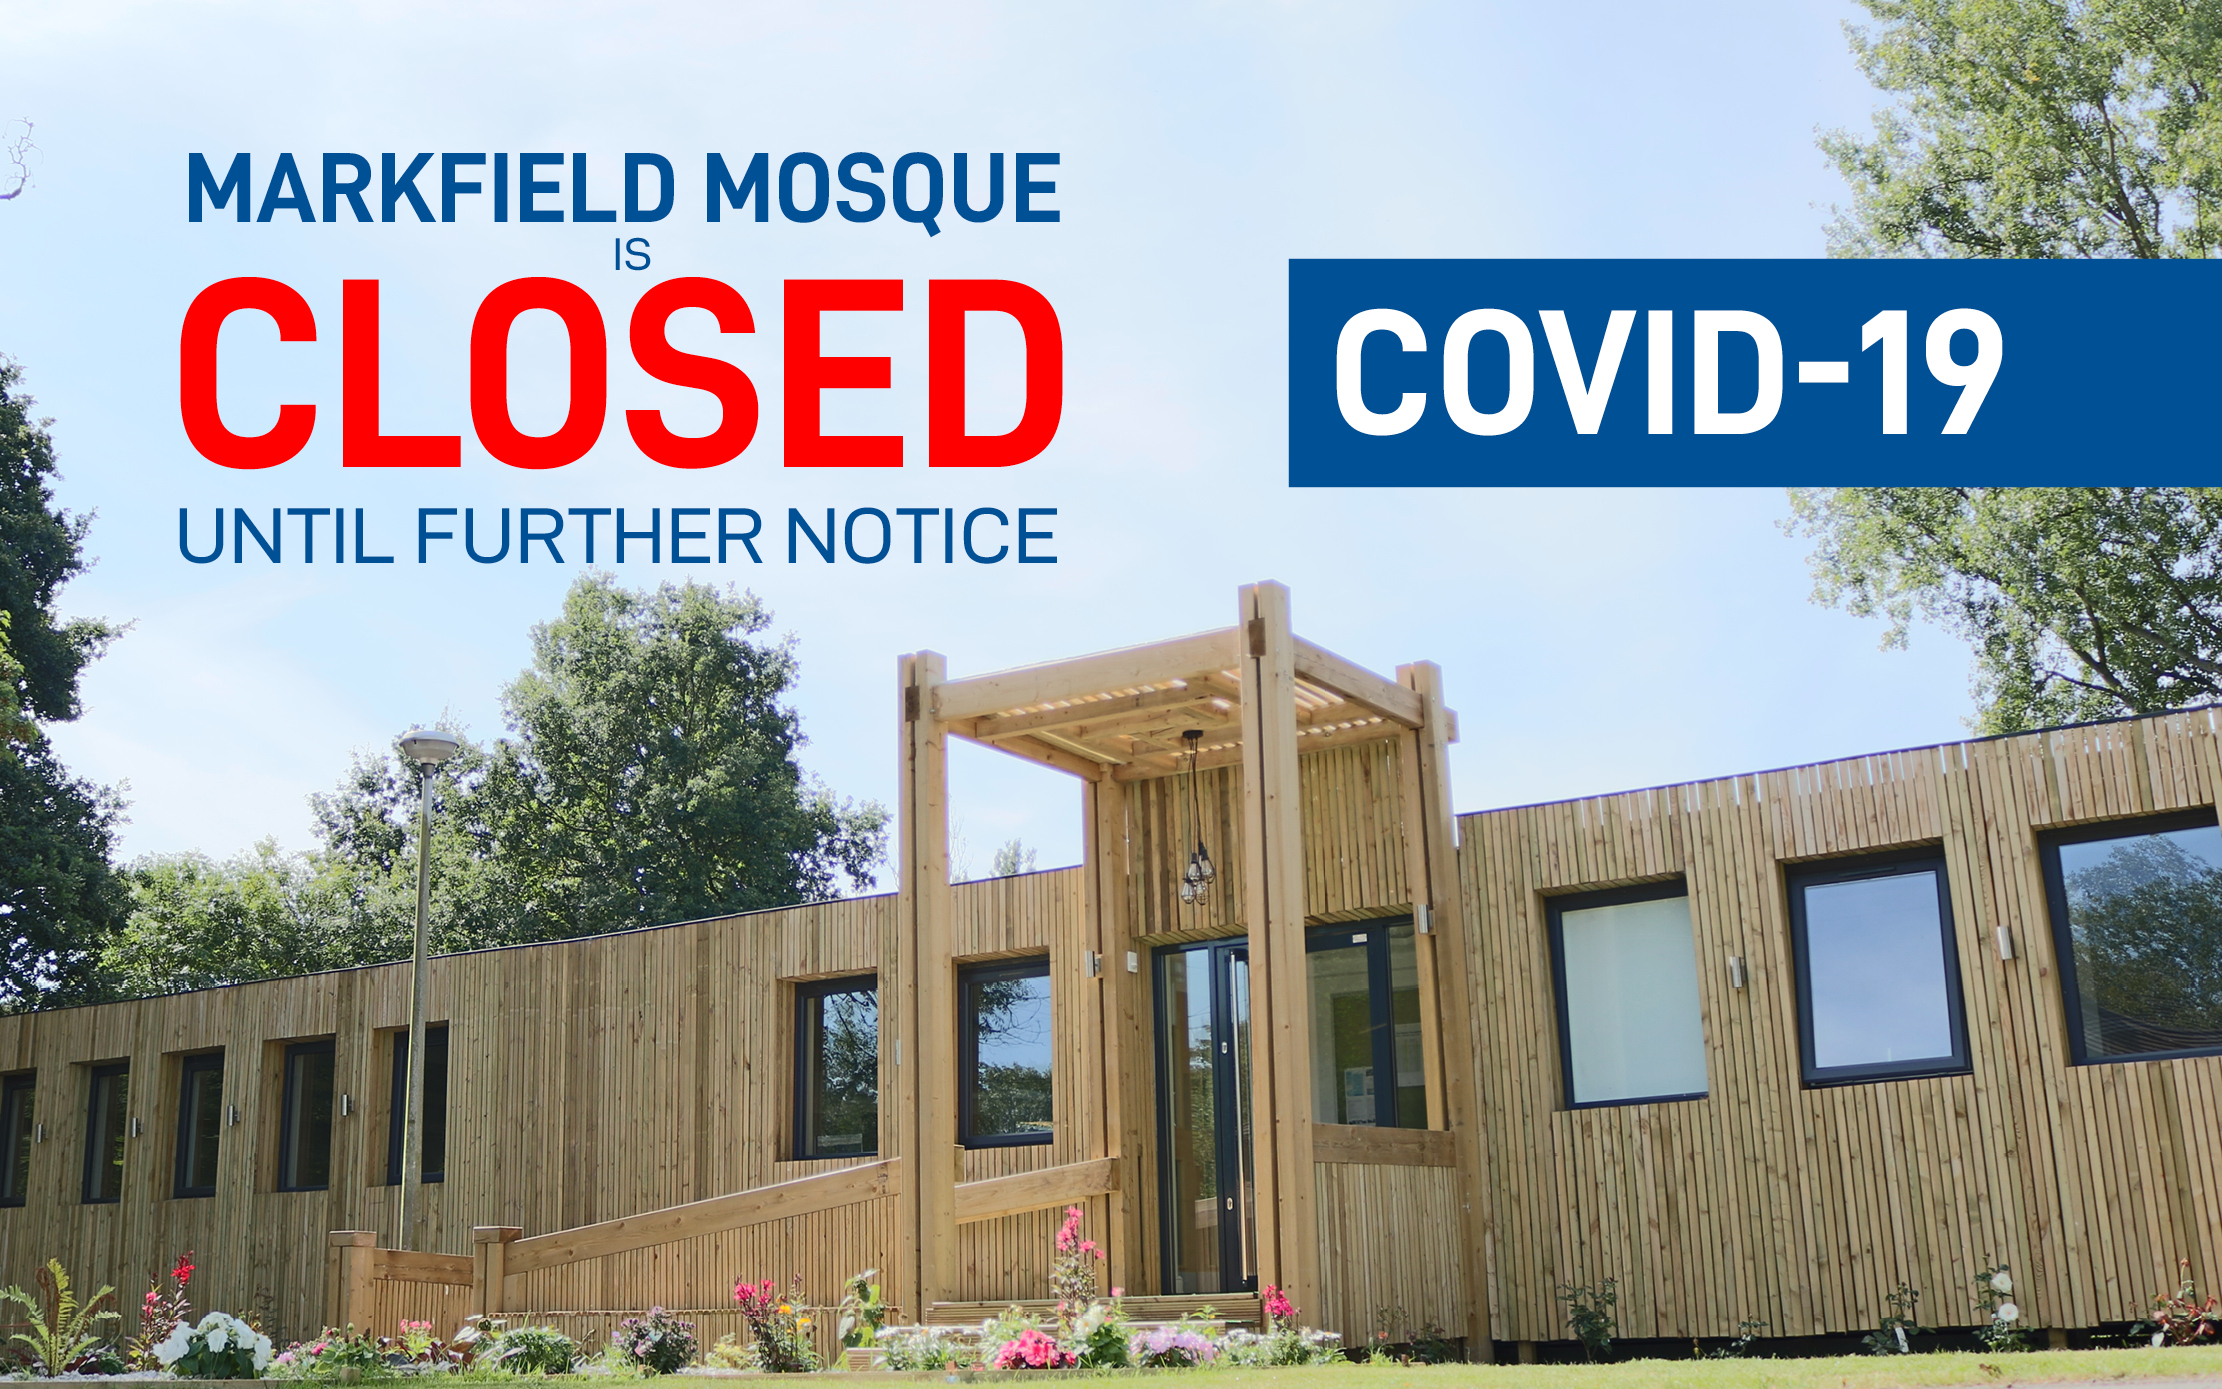 Markfield Mosque is CLOSED 